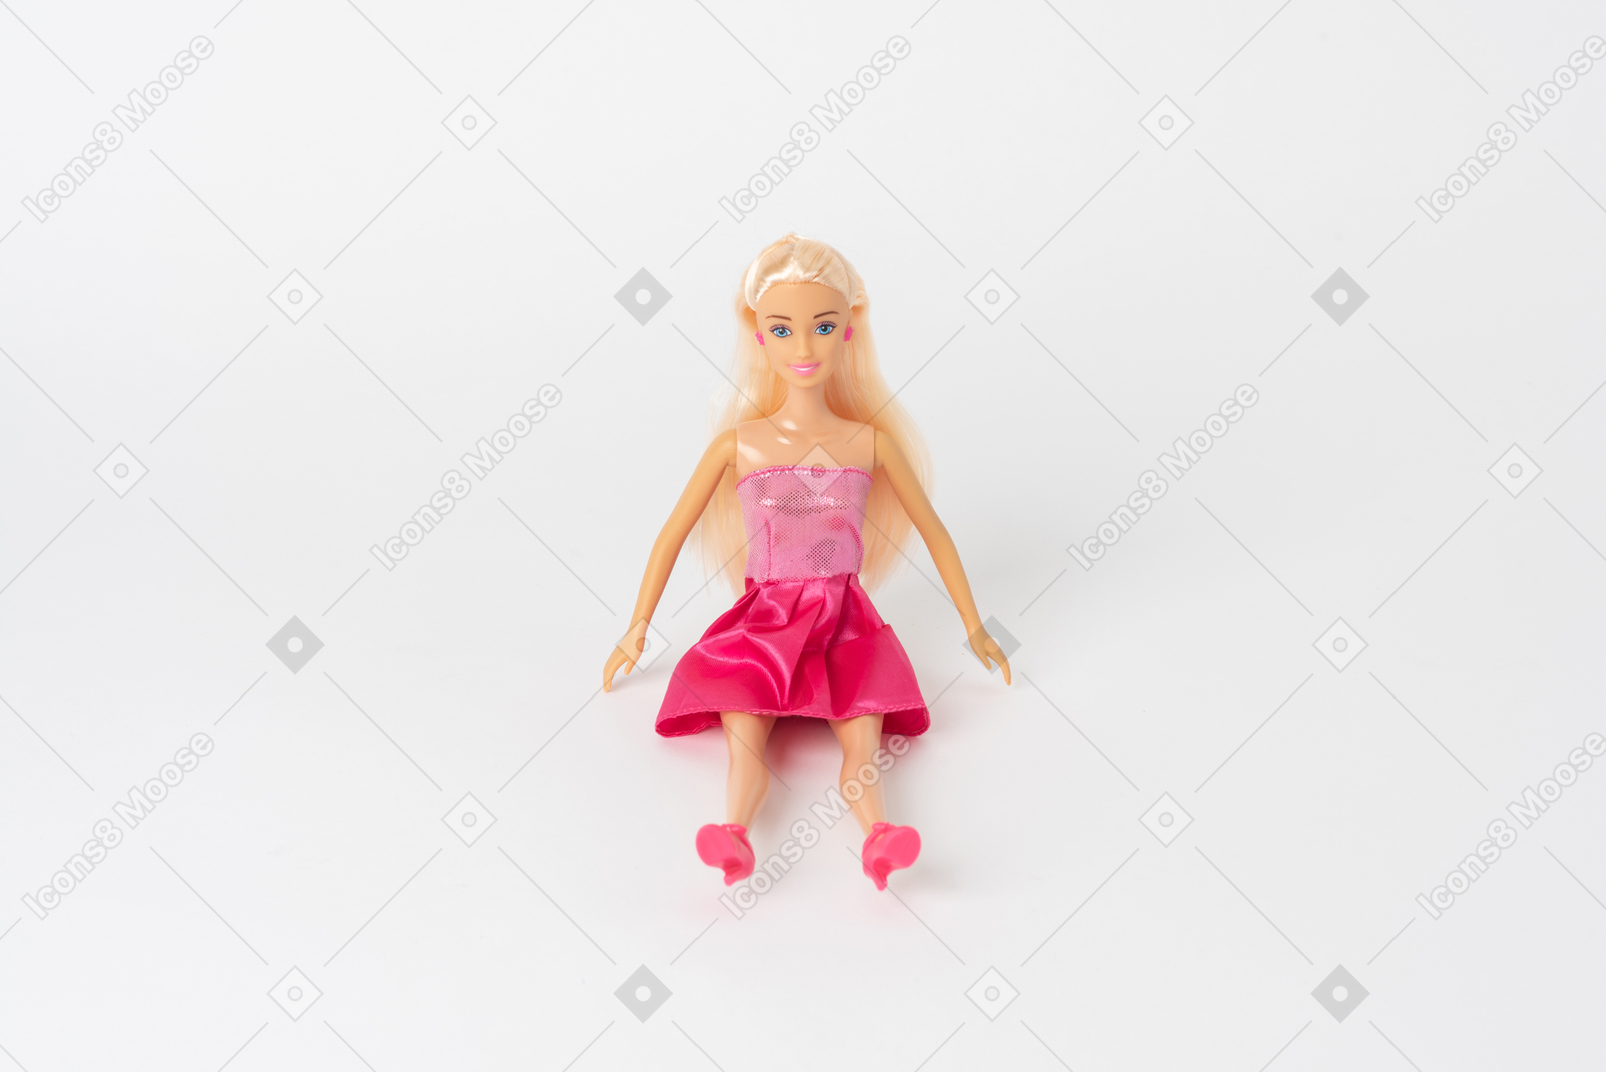 A beautiful barbie doll in a shiny pink dress and pink high heels sitting isolated against a plain white background